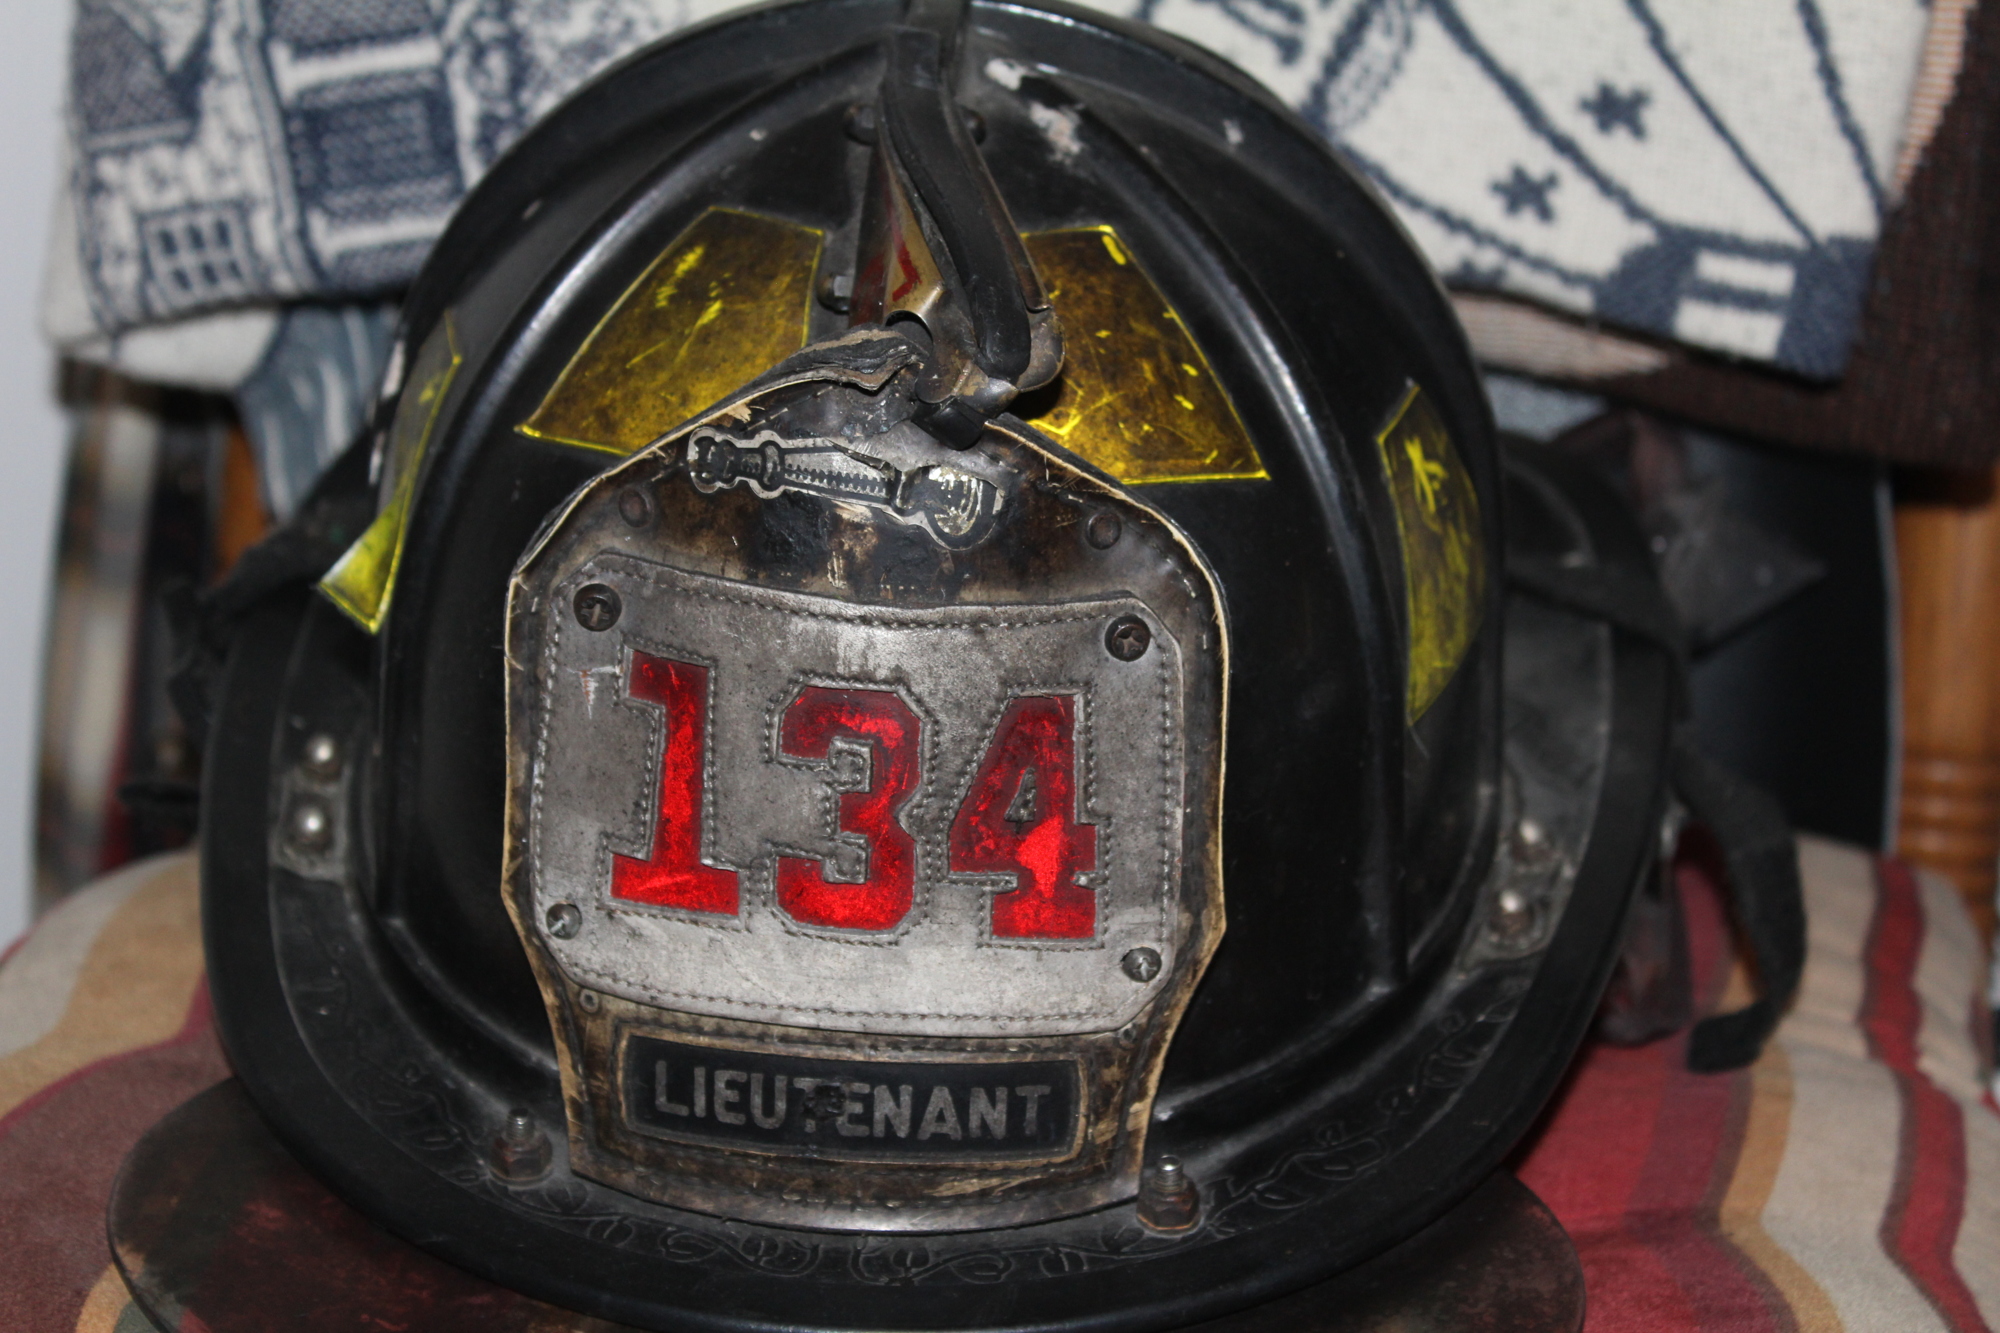 The helmet that Gerard McParland wore on the 9/11 site while he was cleaning up debris.